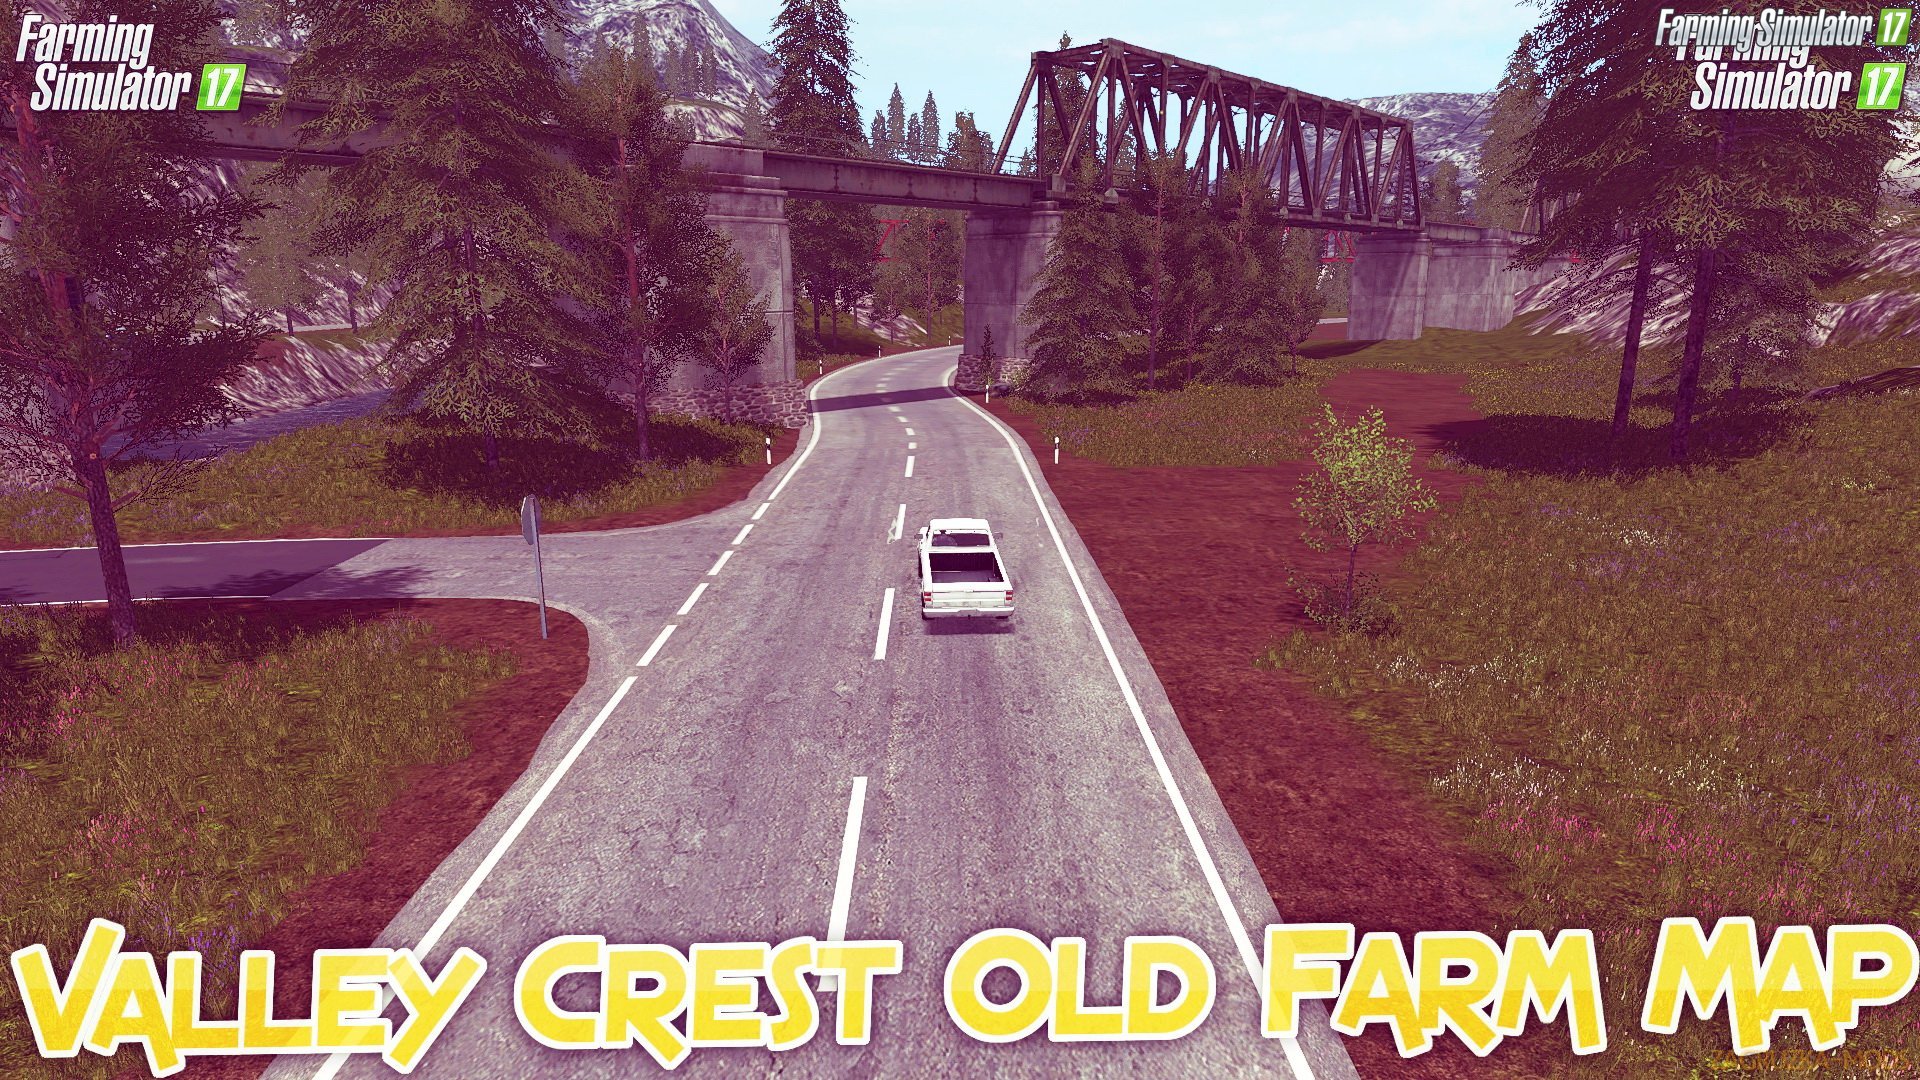 Valley Crest Old Farm Map v3.0 by Dammemax for FS 17